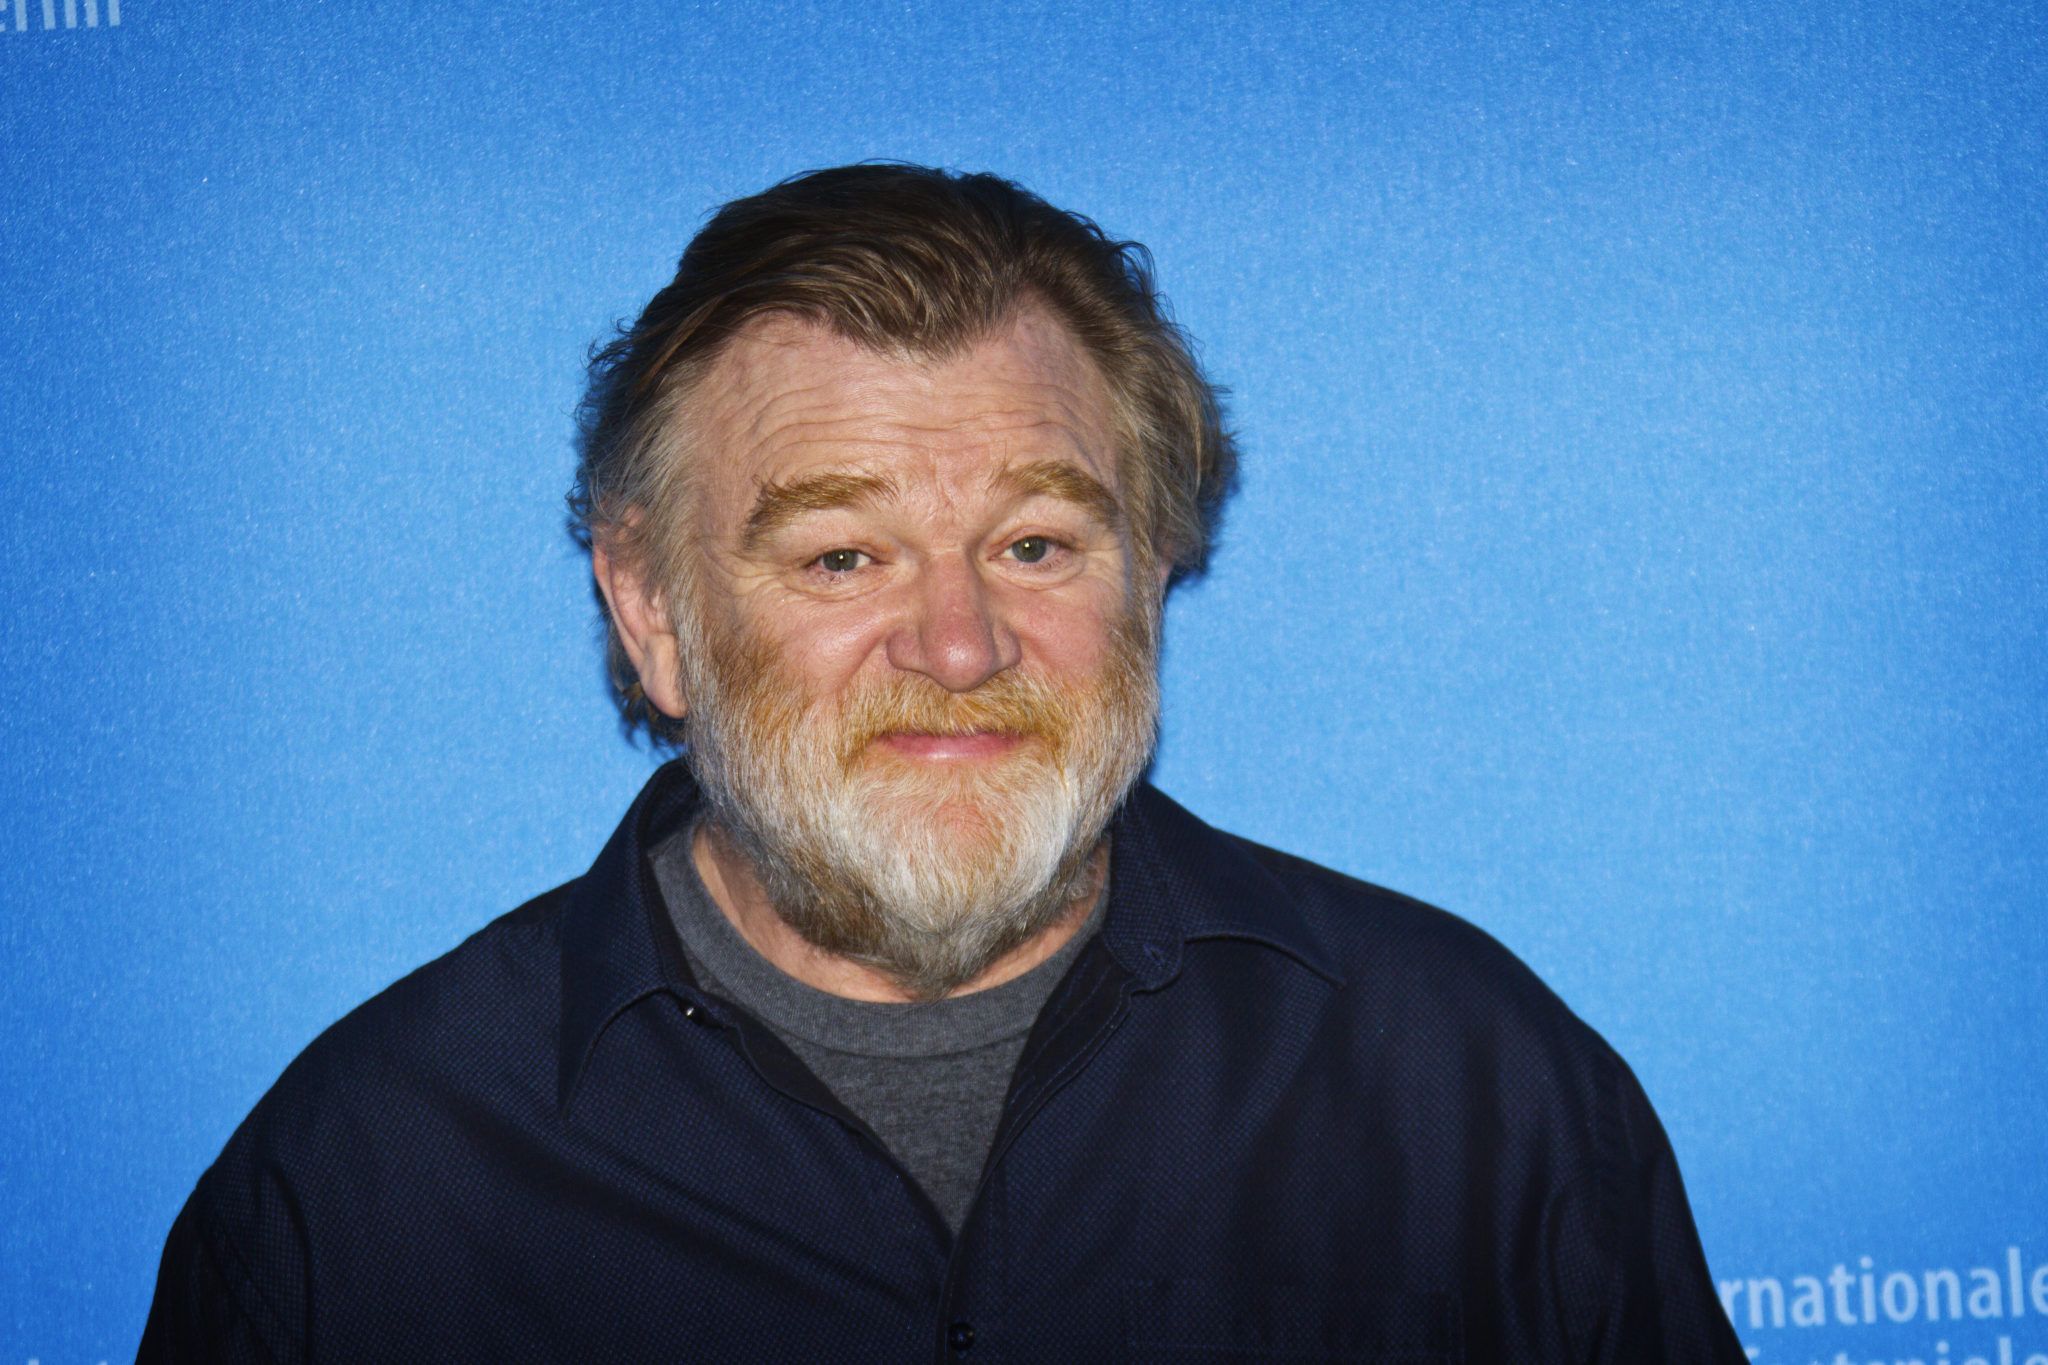 Brendan Gleeson to host Saturday Night Live for one night only